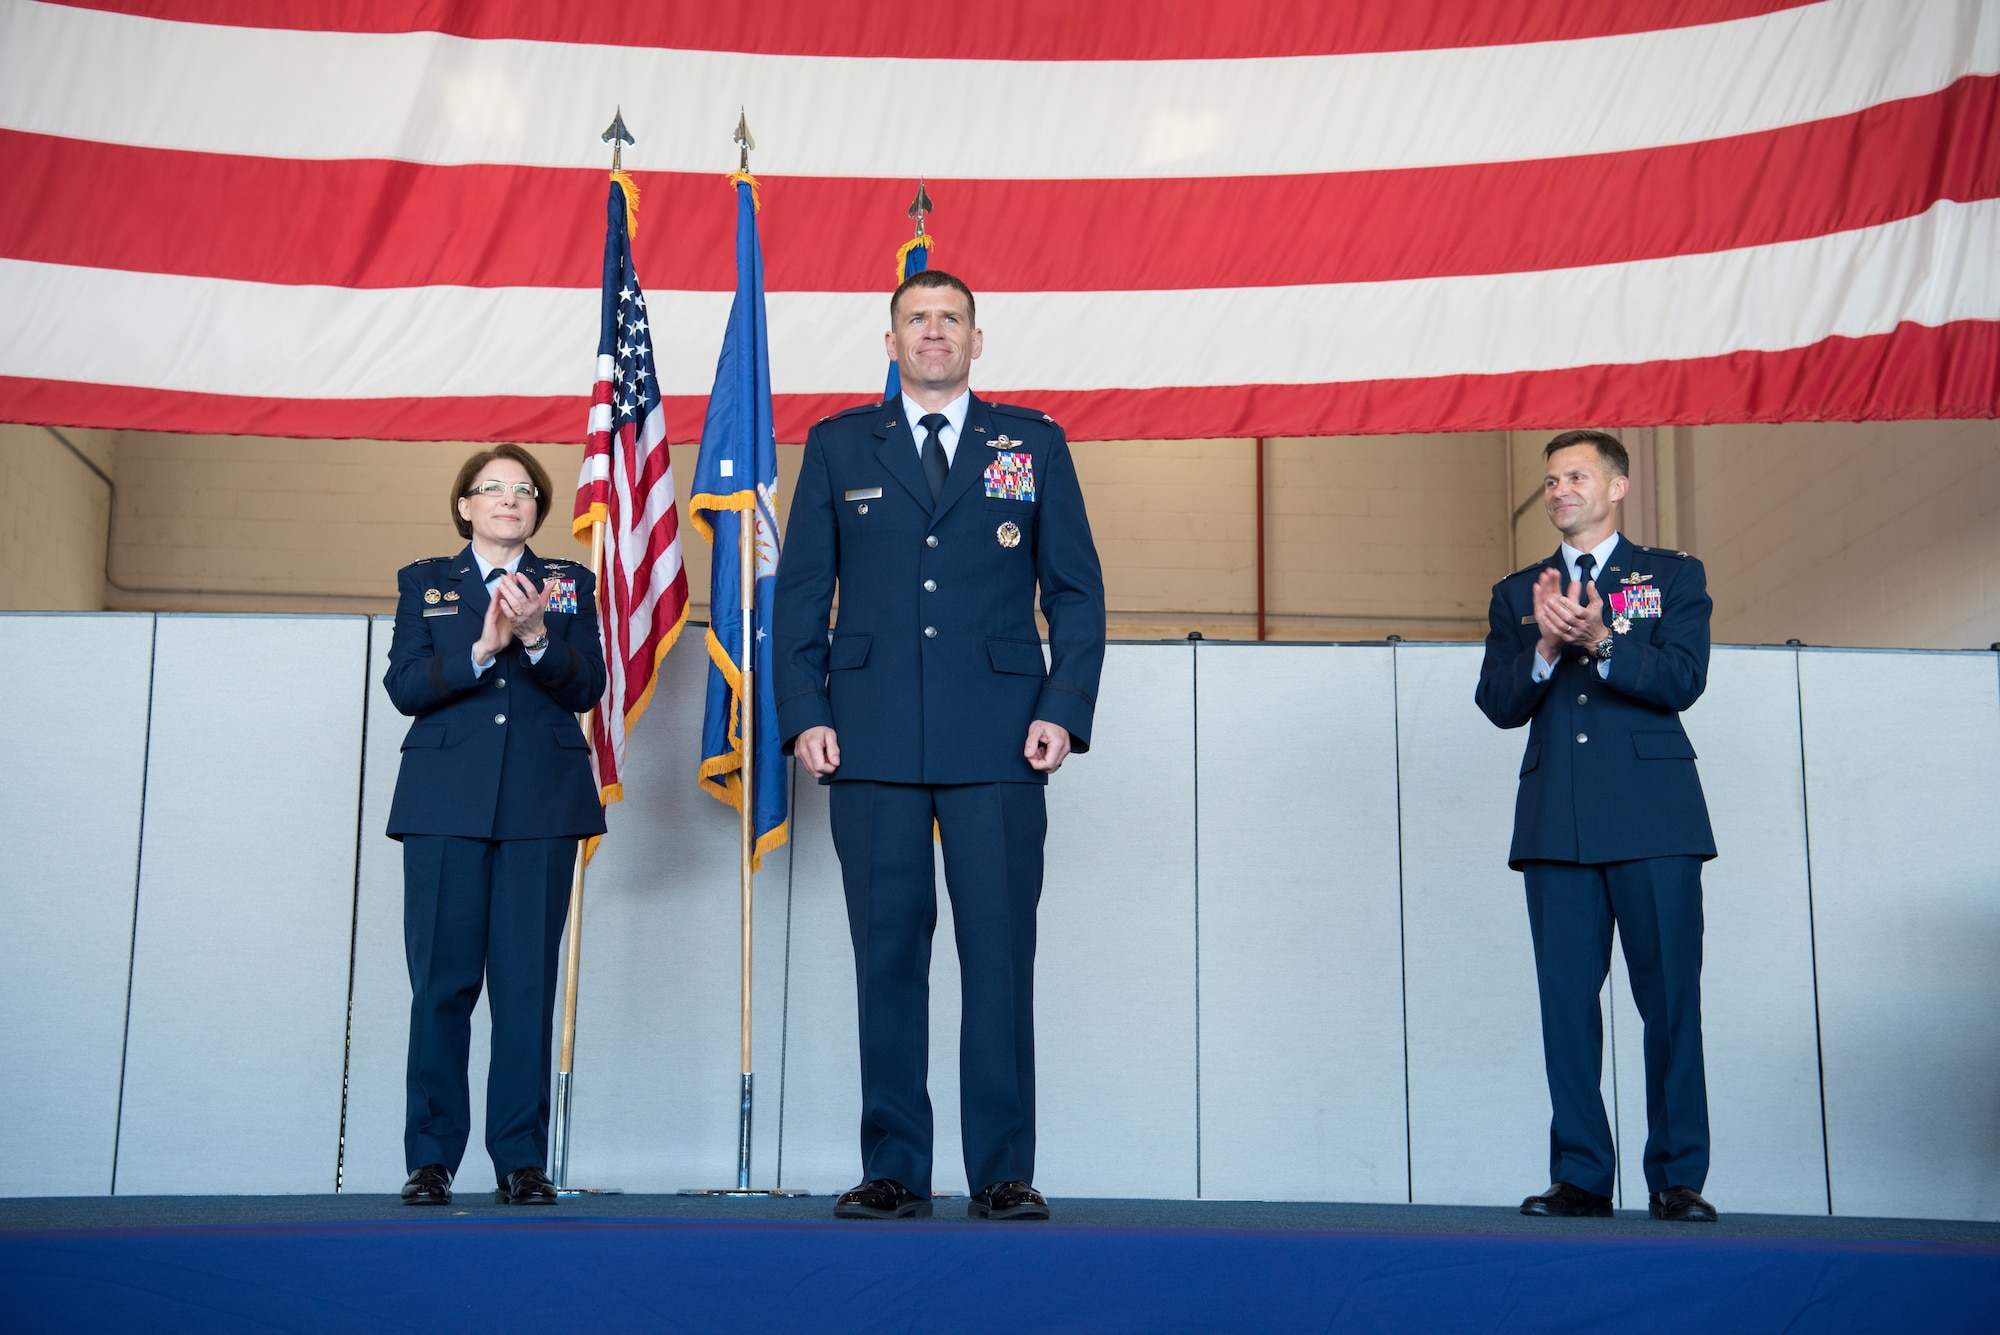 Maj. Gen. Mary O'Brien, 25th Air Force commander, and Col. Larry Broadwell, former 9th Reconnaissance Wing commander, clap for Col. Andrew Clark, 9th RW commander, during the change of command at Beale Air Force Base, California, April 13, 2018. Clark will be responsible for more than 7,000 Airmen and civilians as well as the Air Force's entire high-altitude reconnaissance fleet of RQ-4 Global Hawk and U-2 Dragon lady aircraft.